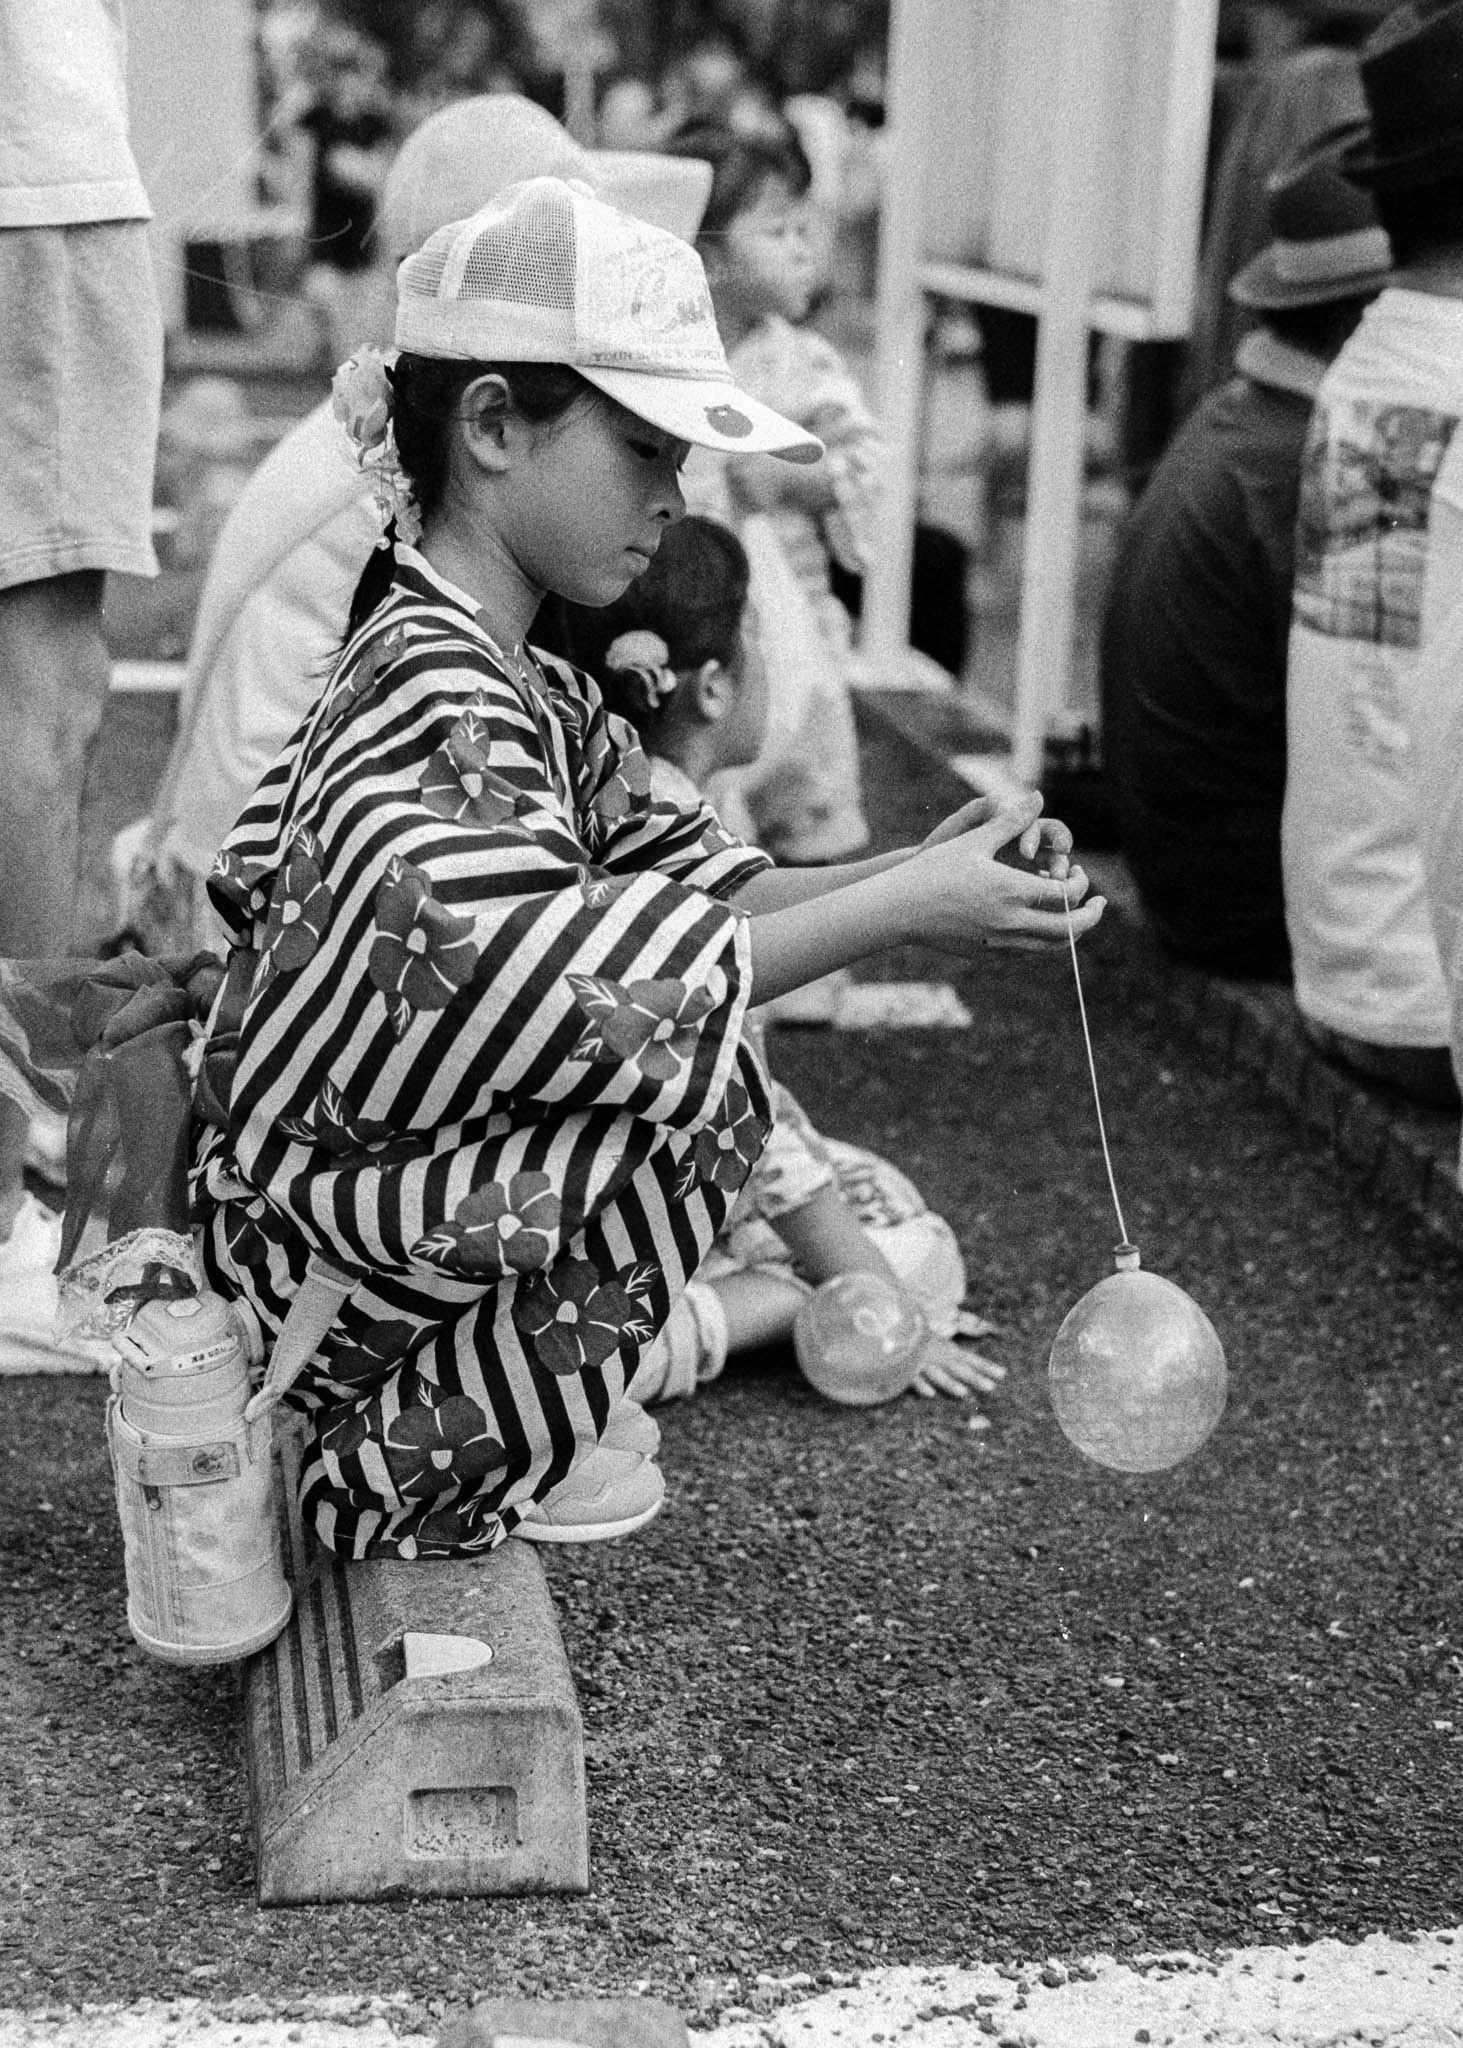 Japanese child intently playing a traditional outdoor game, balancing water-filled balloon.